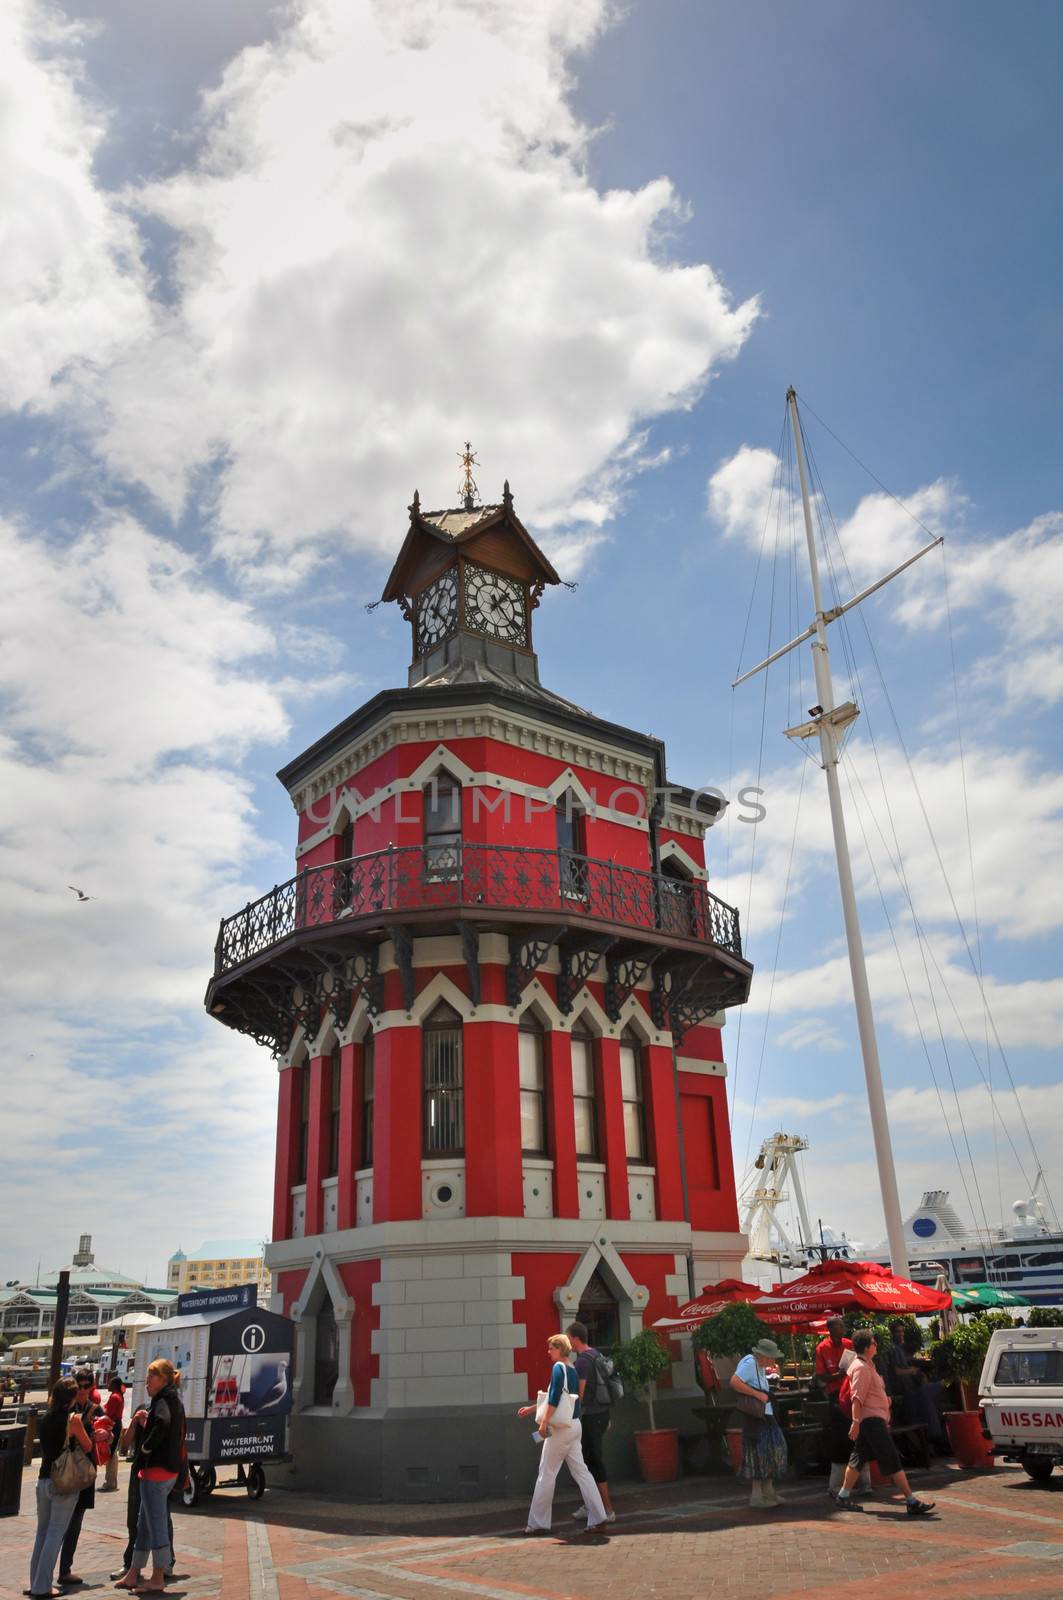 CAPE TOWN, SOUTH AFRICA - FEB 19: Clock tower in the Victoria and Alfred waterfront on Feb 19, 2009  in Cape Town, South Africa. It is built 1883 and is a popular tourist landmark.